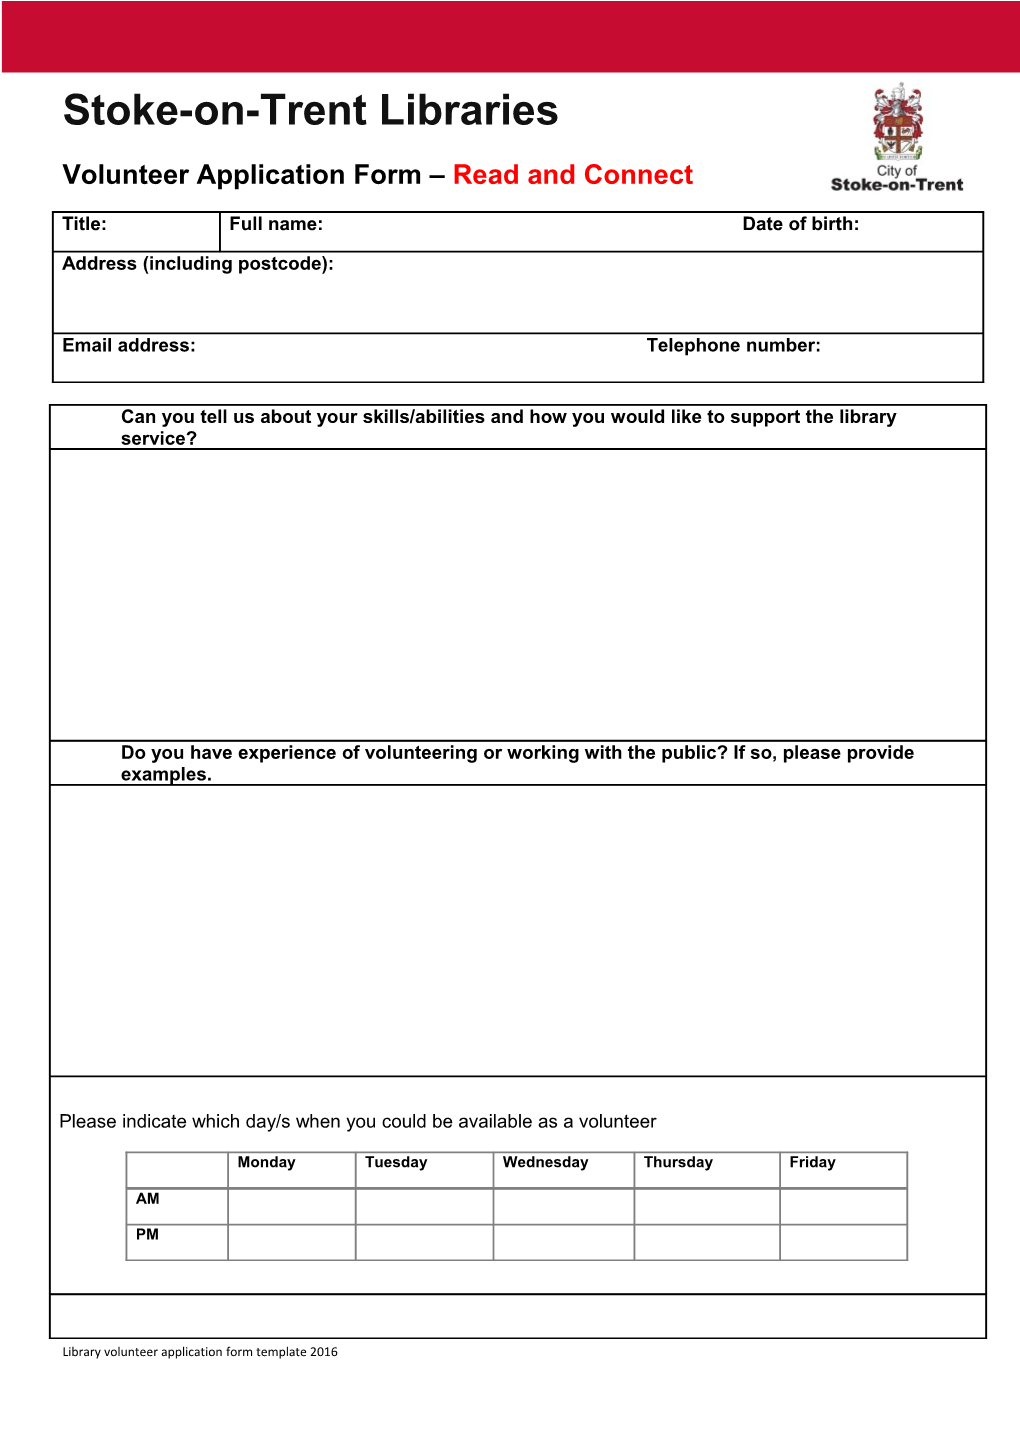 Volunteer Application Form Read and Connect